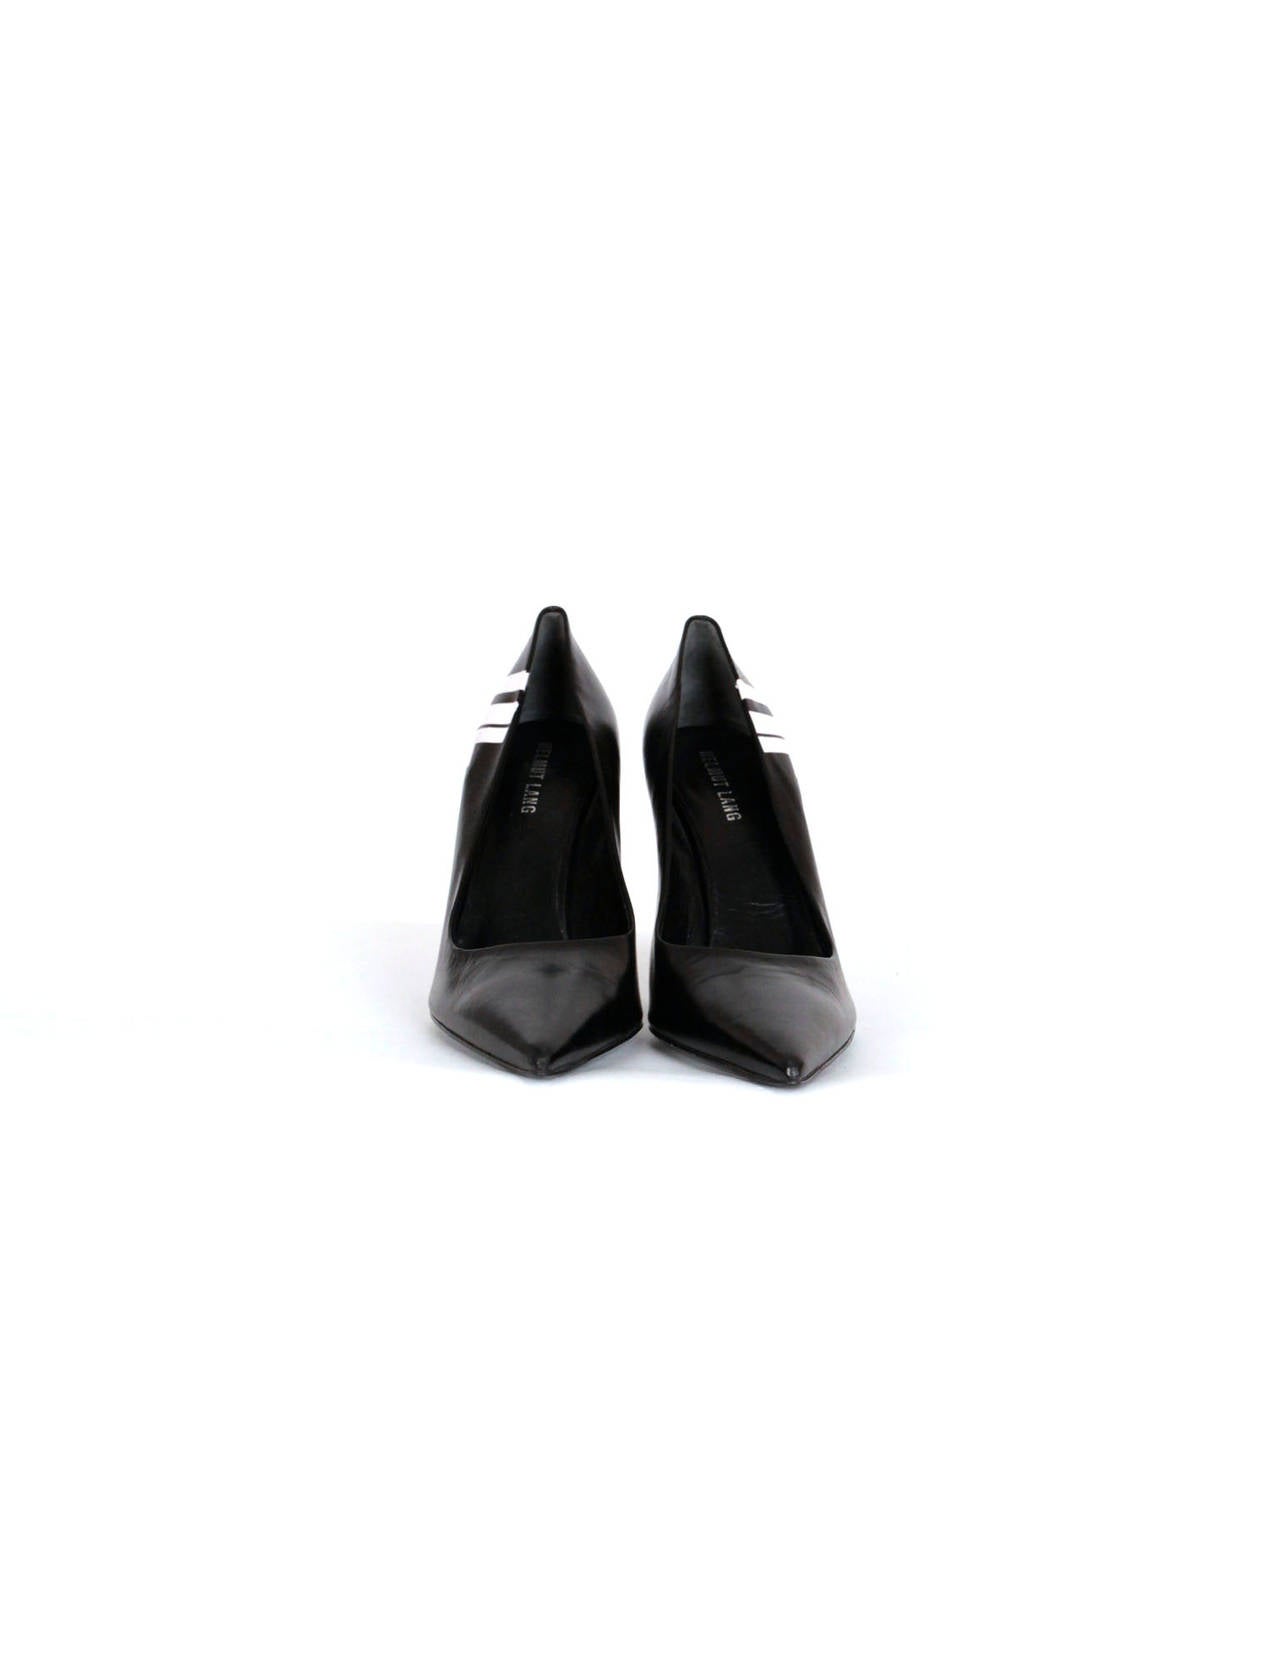 Helmut Lang black pointed pumps with spiked heel and Helmut lang initials in white on side of pump. This period I would strongly assume was the collaboration between Melanie Ward and Helmut Lang. Iconic Era.